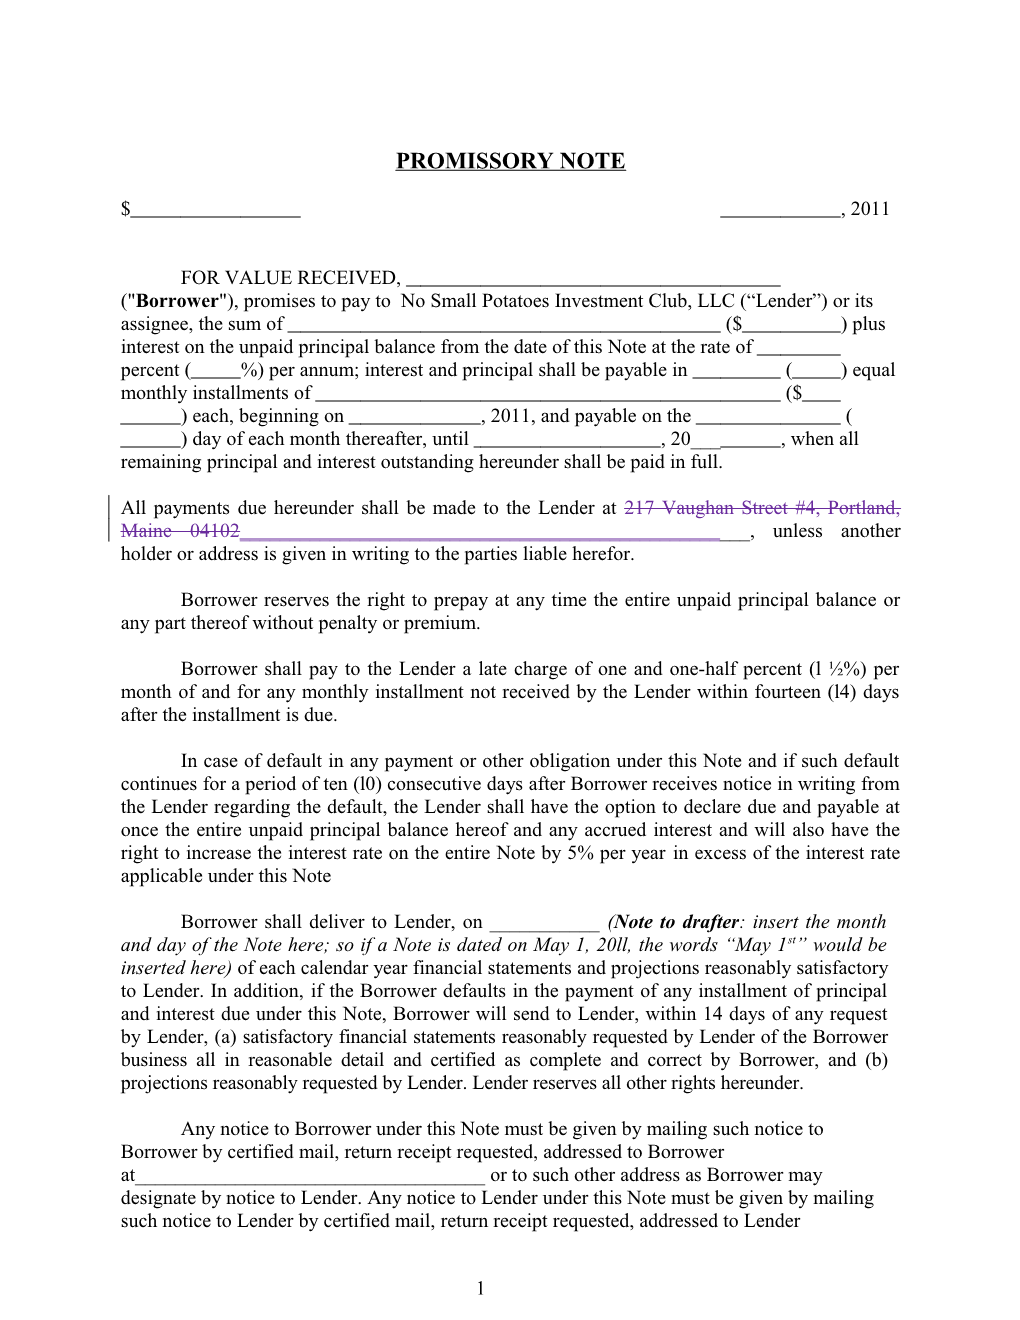 FORM: Promissory Note